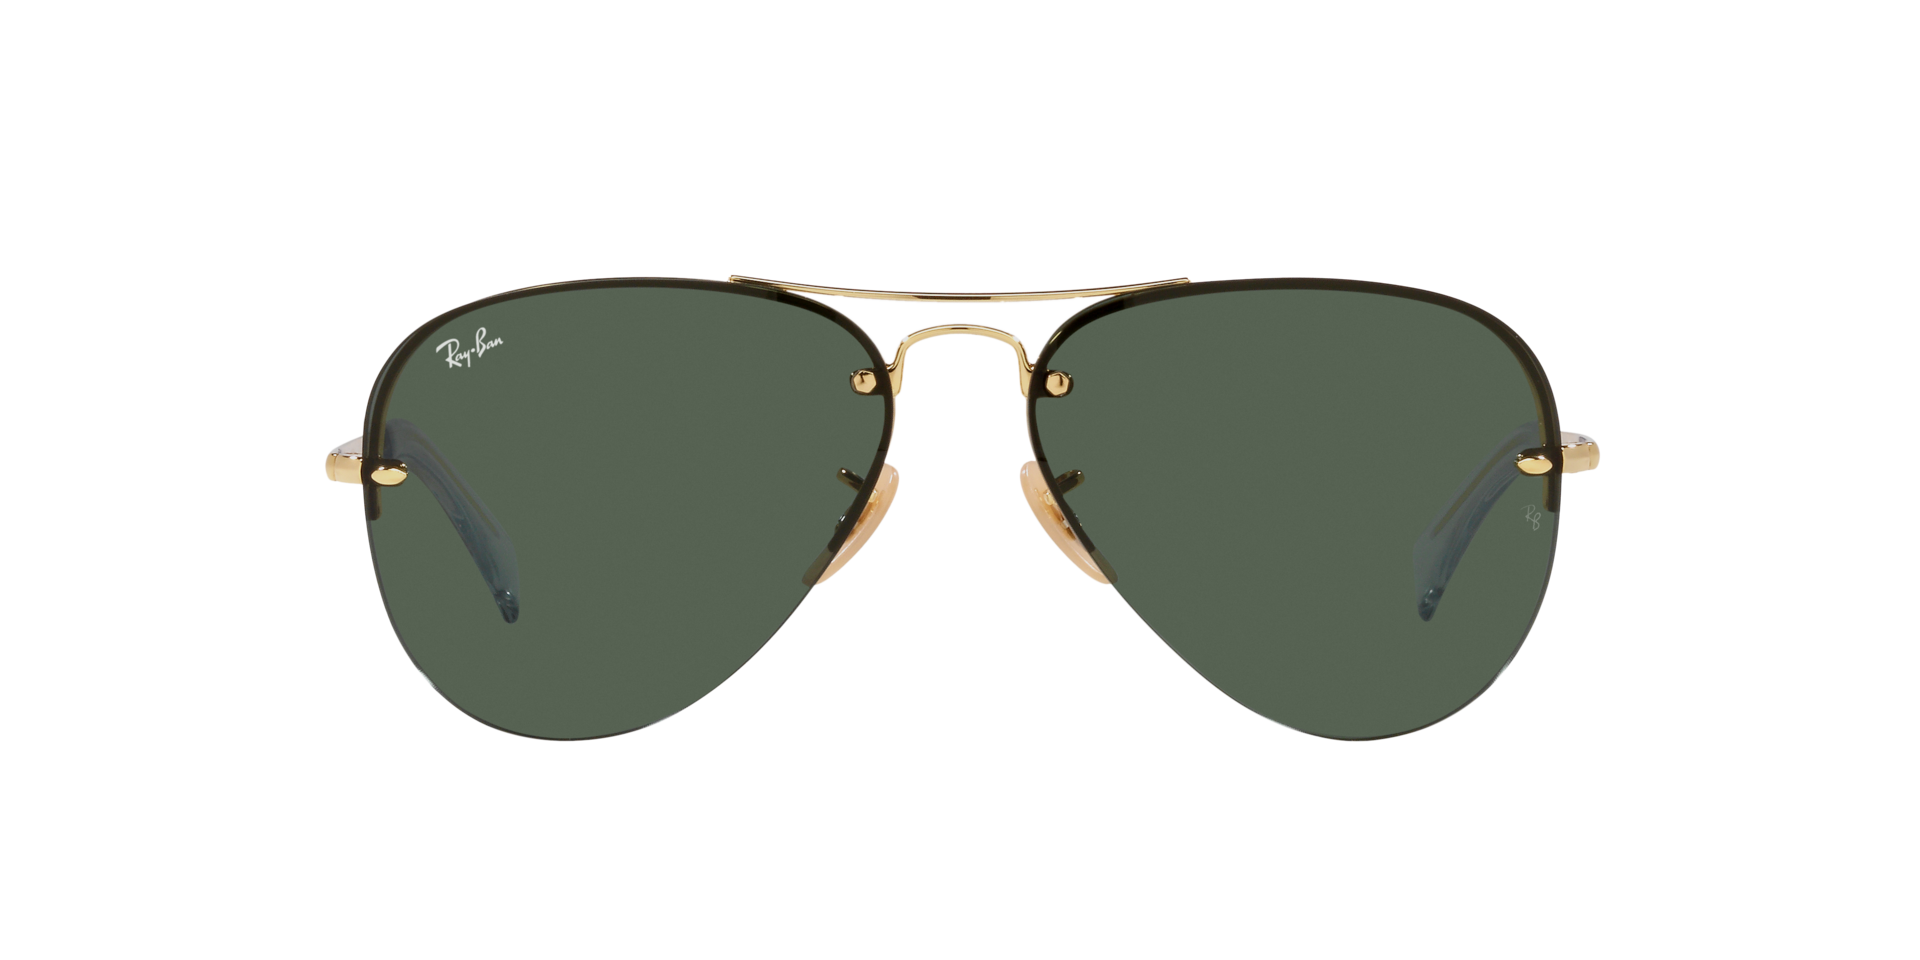 Oval sunglasses Ray-Ban Black in Other - 36151644